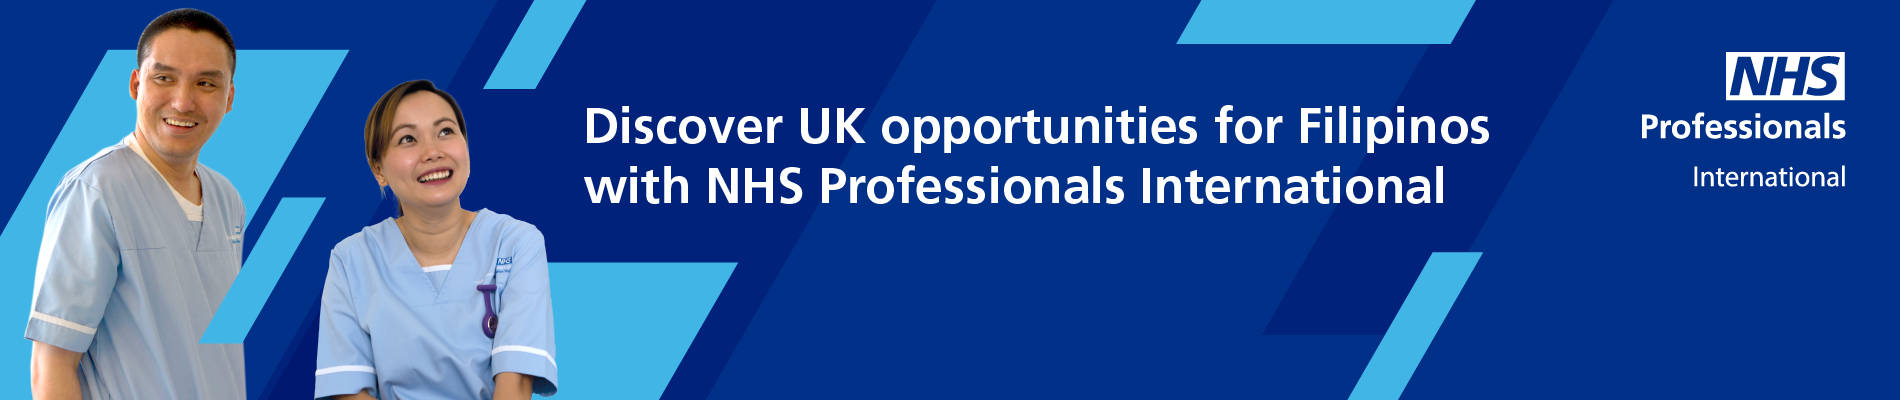 Discover UK opportunities for Filipinos with NHS Professionals International